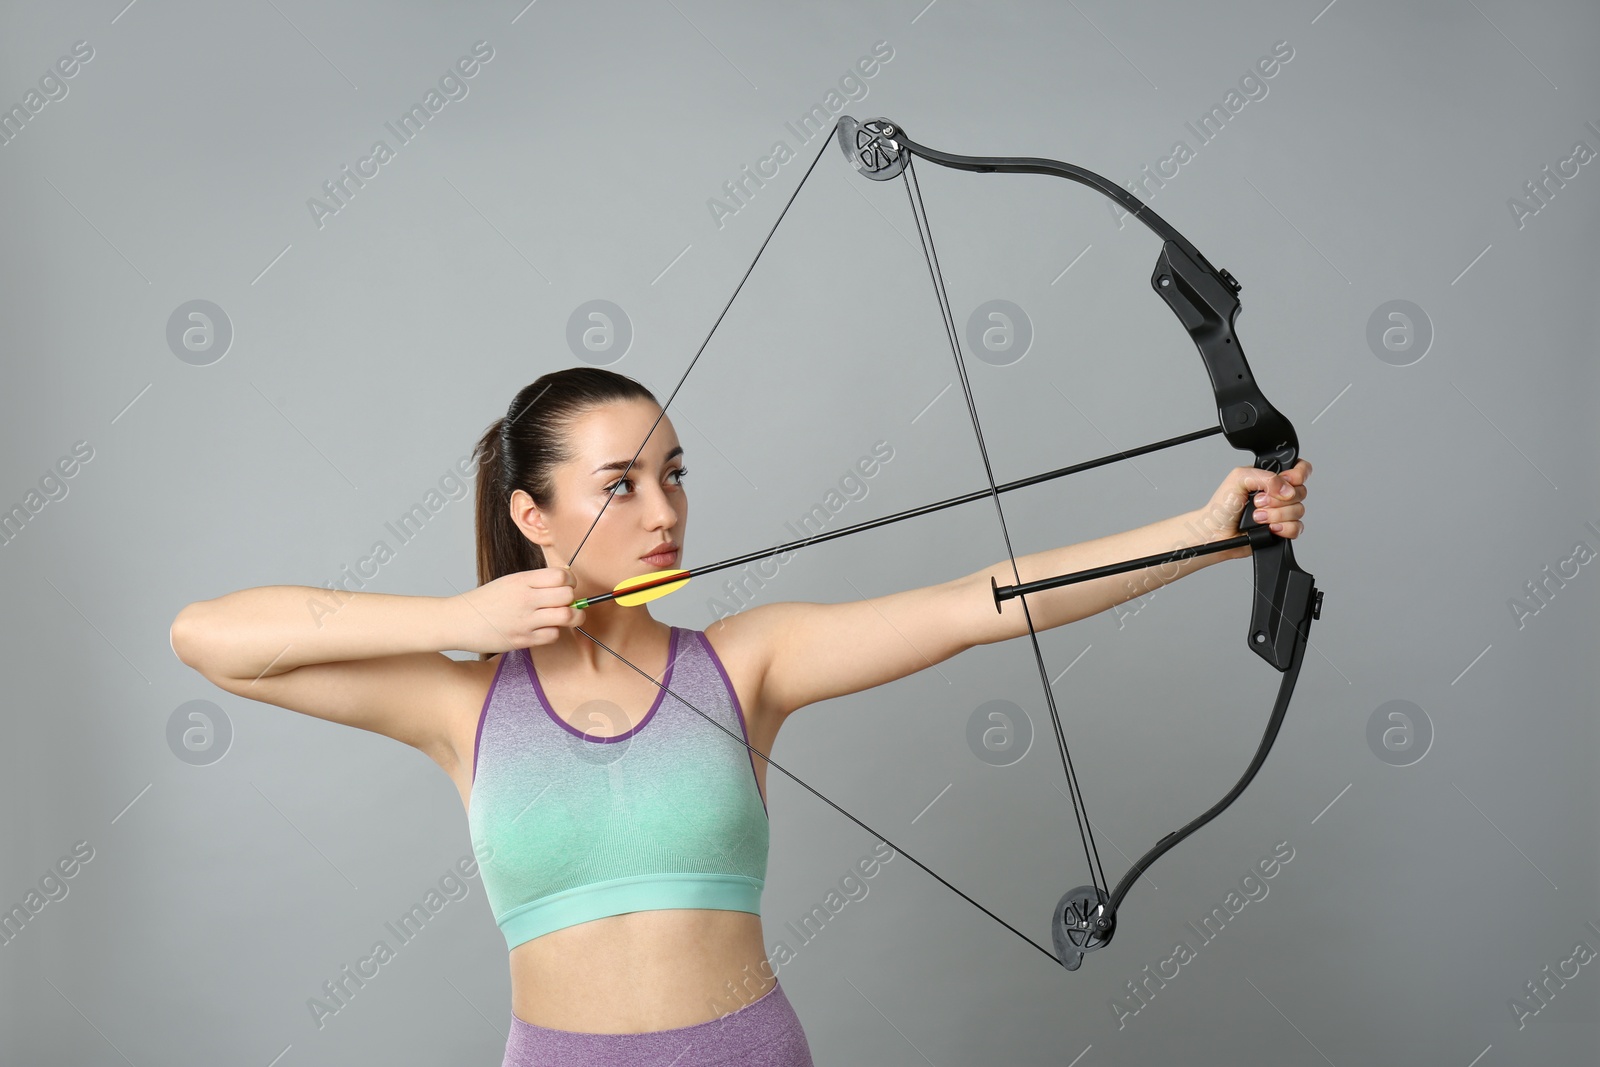 Photo of Young woman practicing archery on light grey background